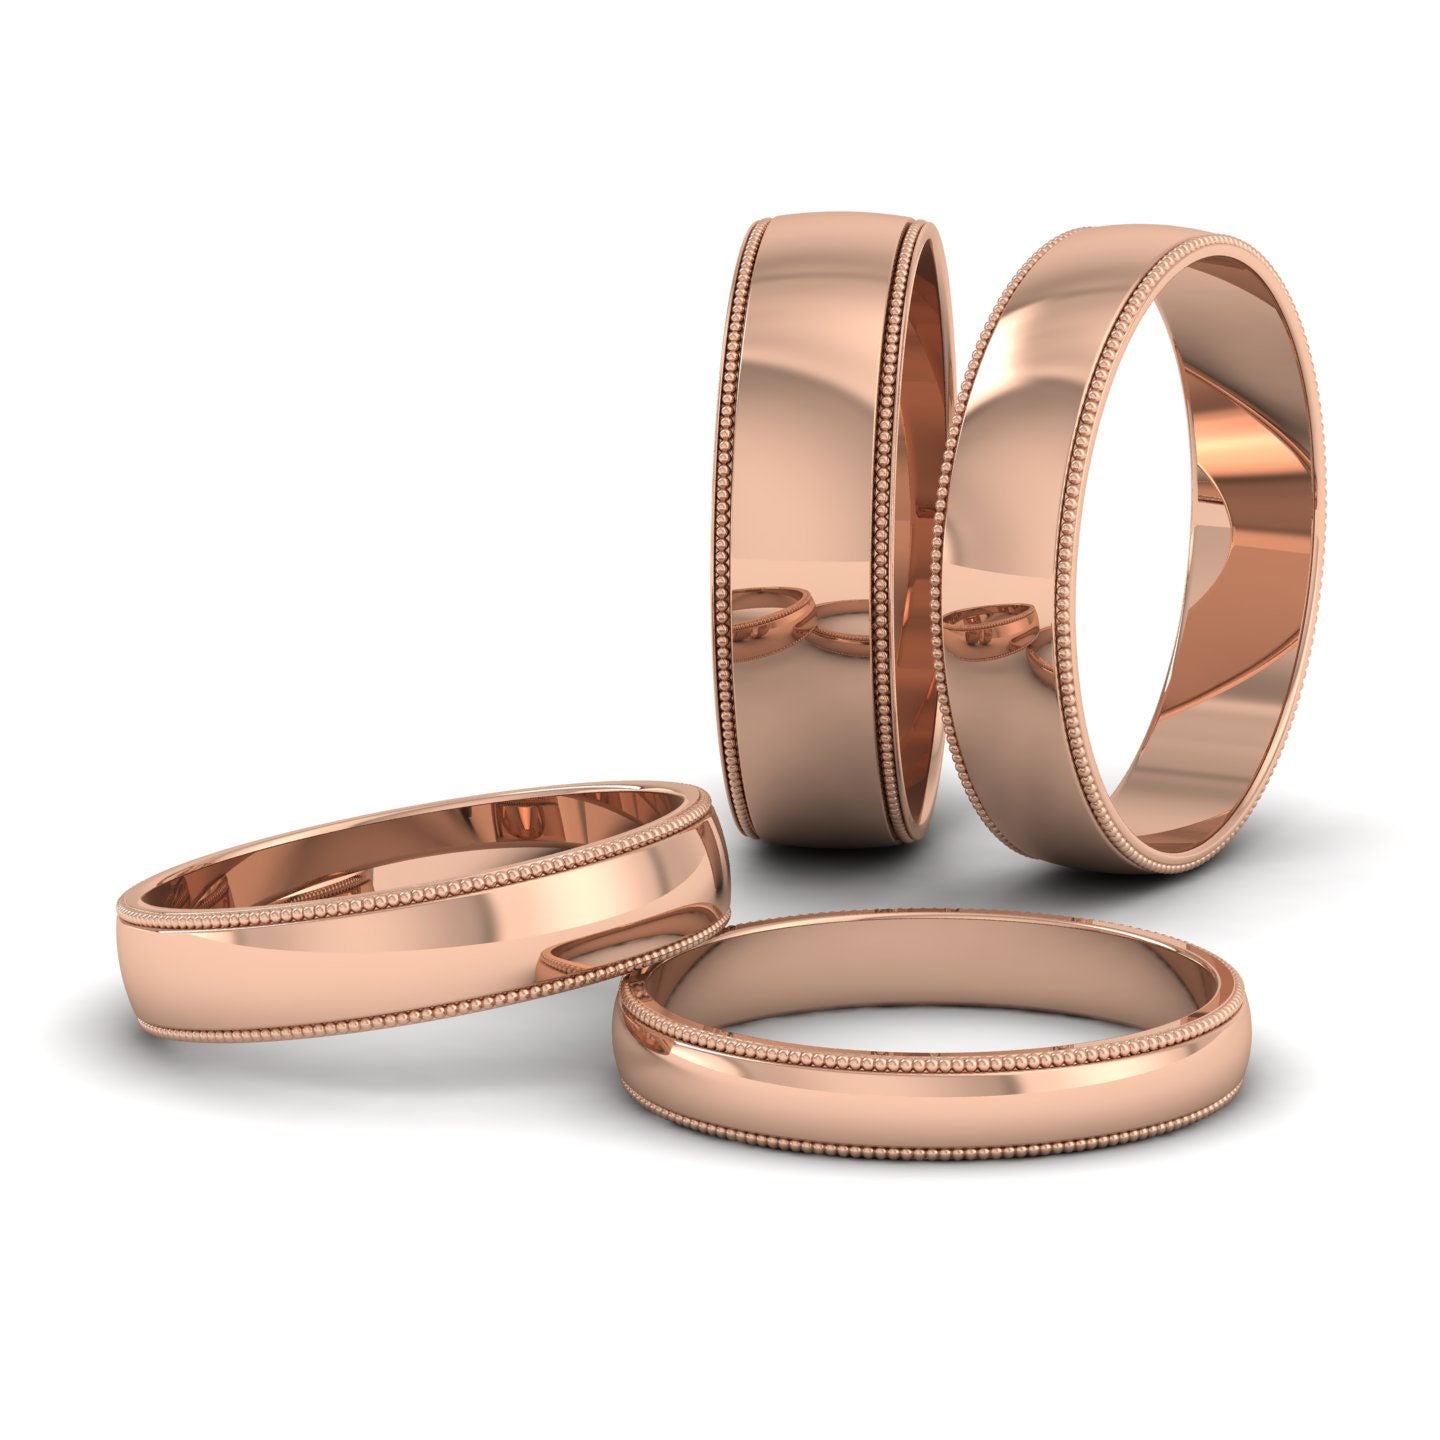 Millgrained Edge 18ct Rose Gold 3mm Wedding Ring